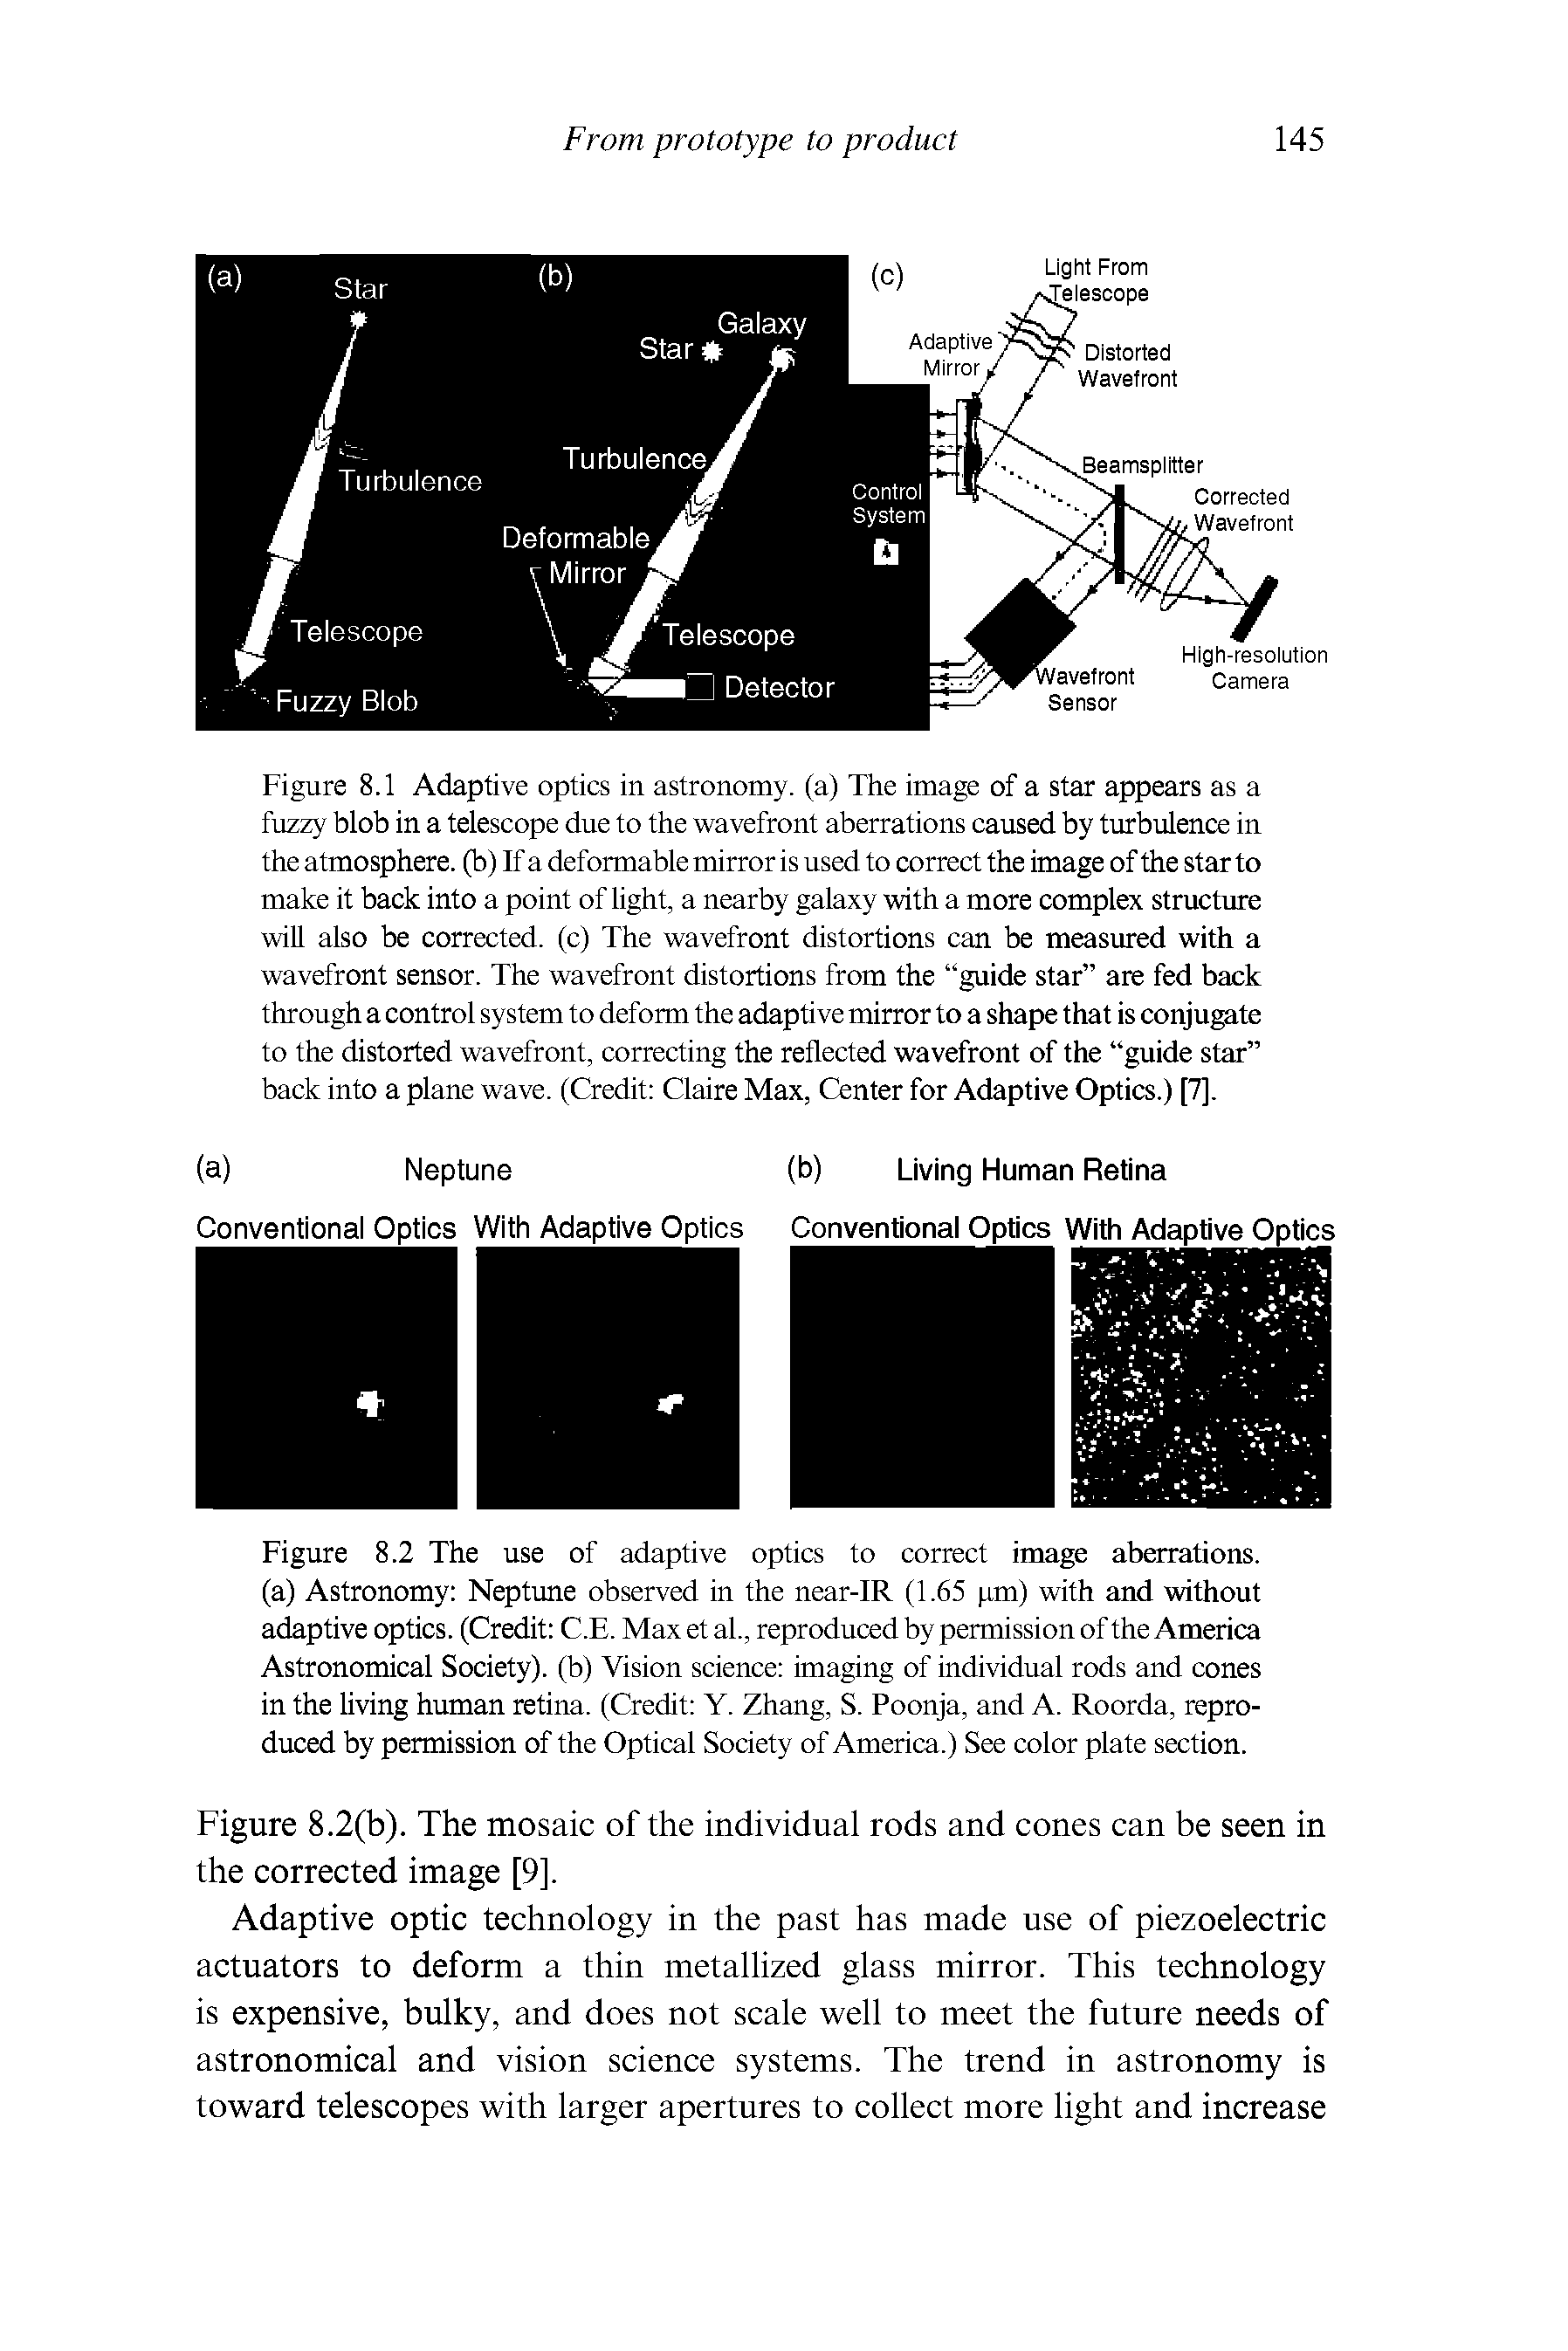 Figure 8.1 Adaptive optics in astronomy, (a) The image of a star appears as a fuzzy blob in a telescope due to the wavefront aberrations caused by turbulence in the atmosphere, (b) If a deformable mirror is used to correct the image of the star to make it back into a point of Ught, a nearby galaxy with a more complex structure will also be corrected, (c) The wavefront distortions can be measured with a wavefront sensor. The wavefront distortions from the guide star are fed back through a control system to deform the adaptive mirror to a shape that is conjugate to the distorted wavefront, correcting the reflected wavefront of the guide star back into a plane wave. (Credit Claire Max, Center for Adaptive Optics.) [7],...